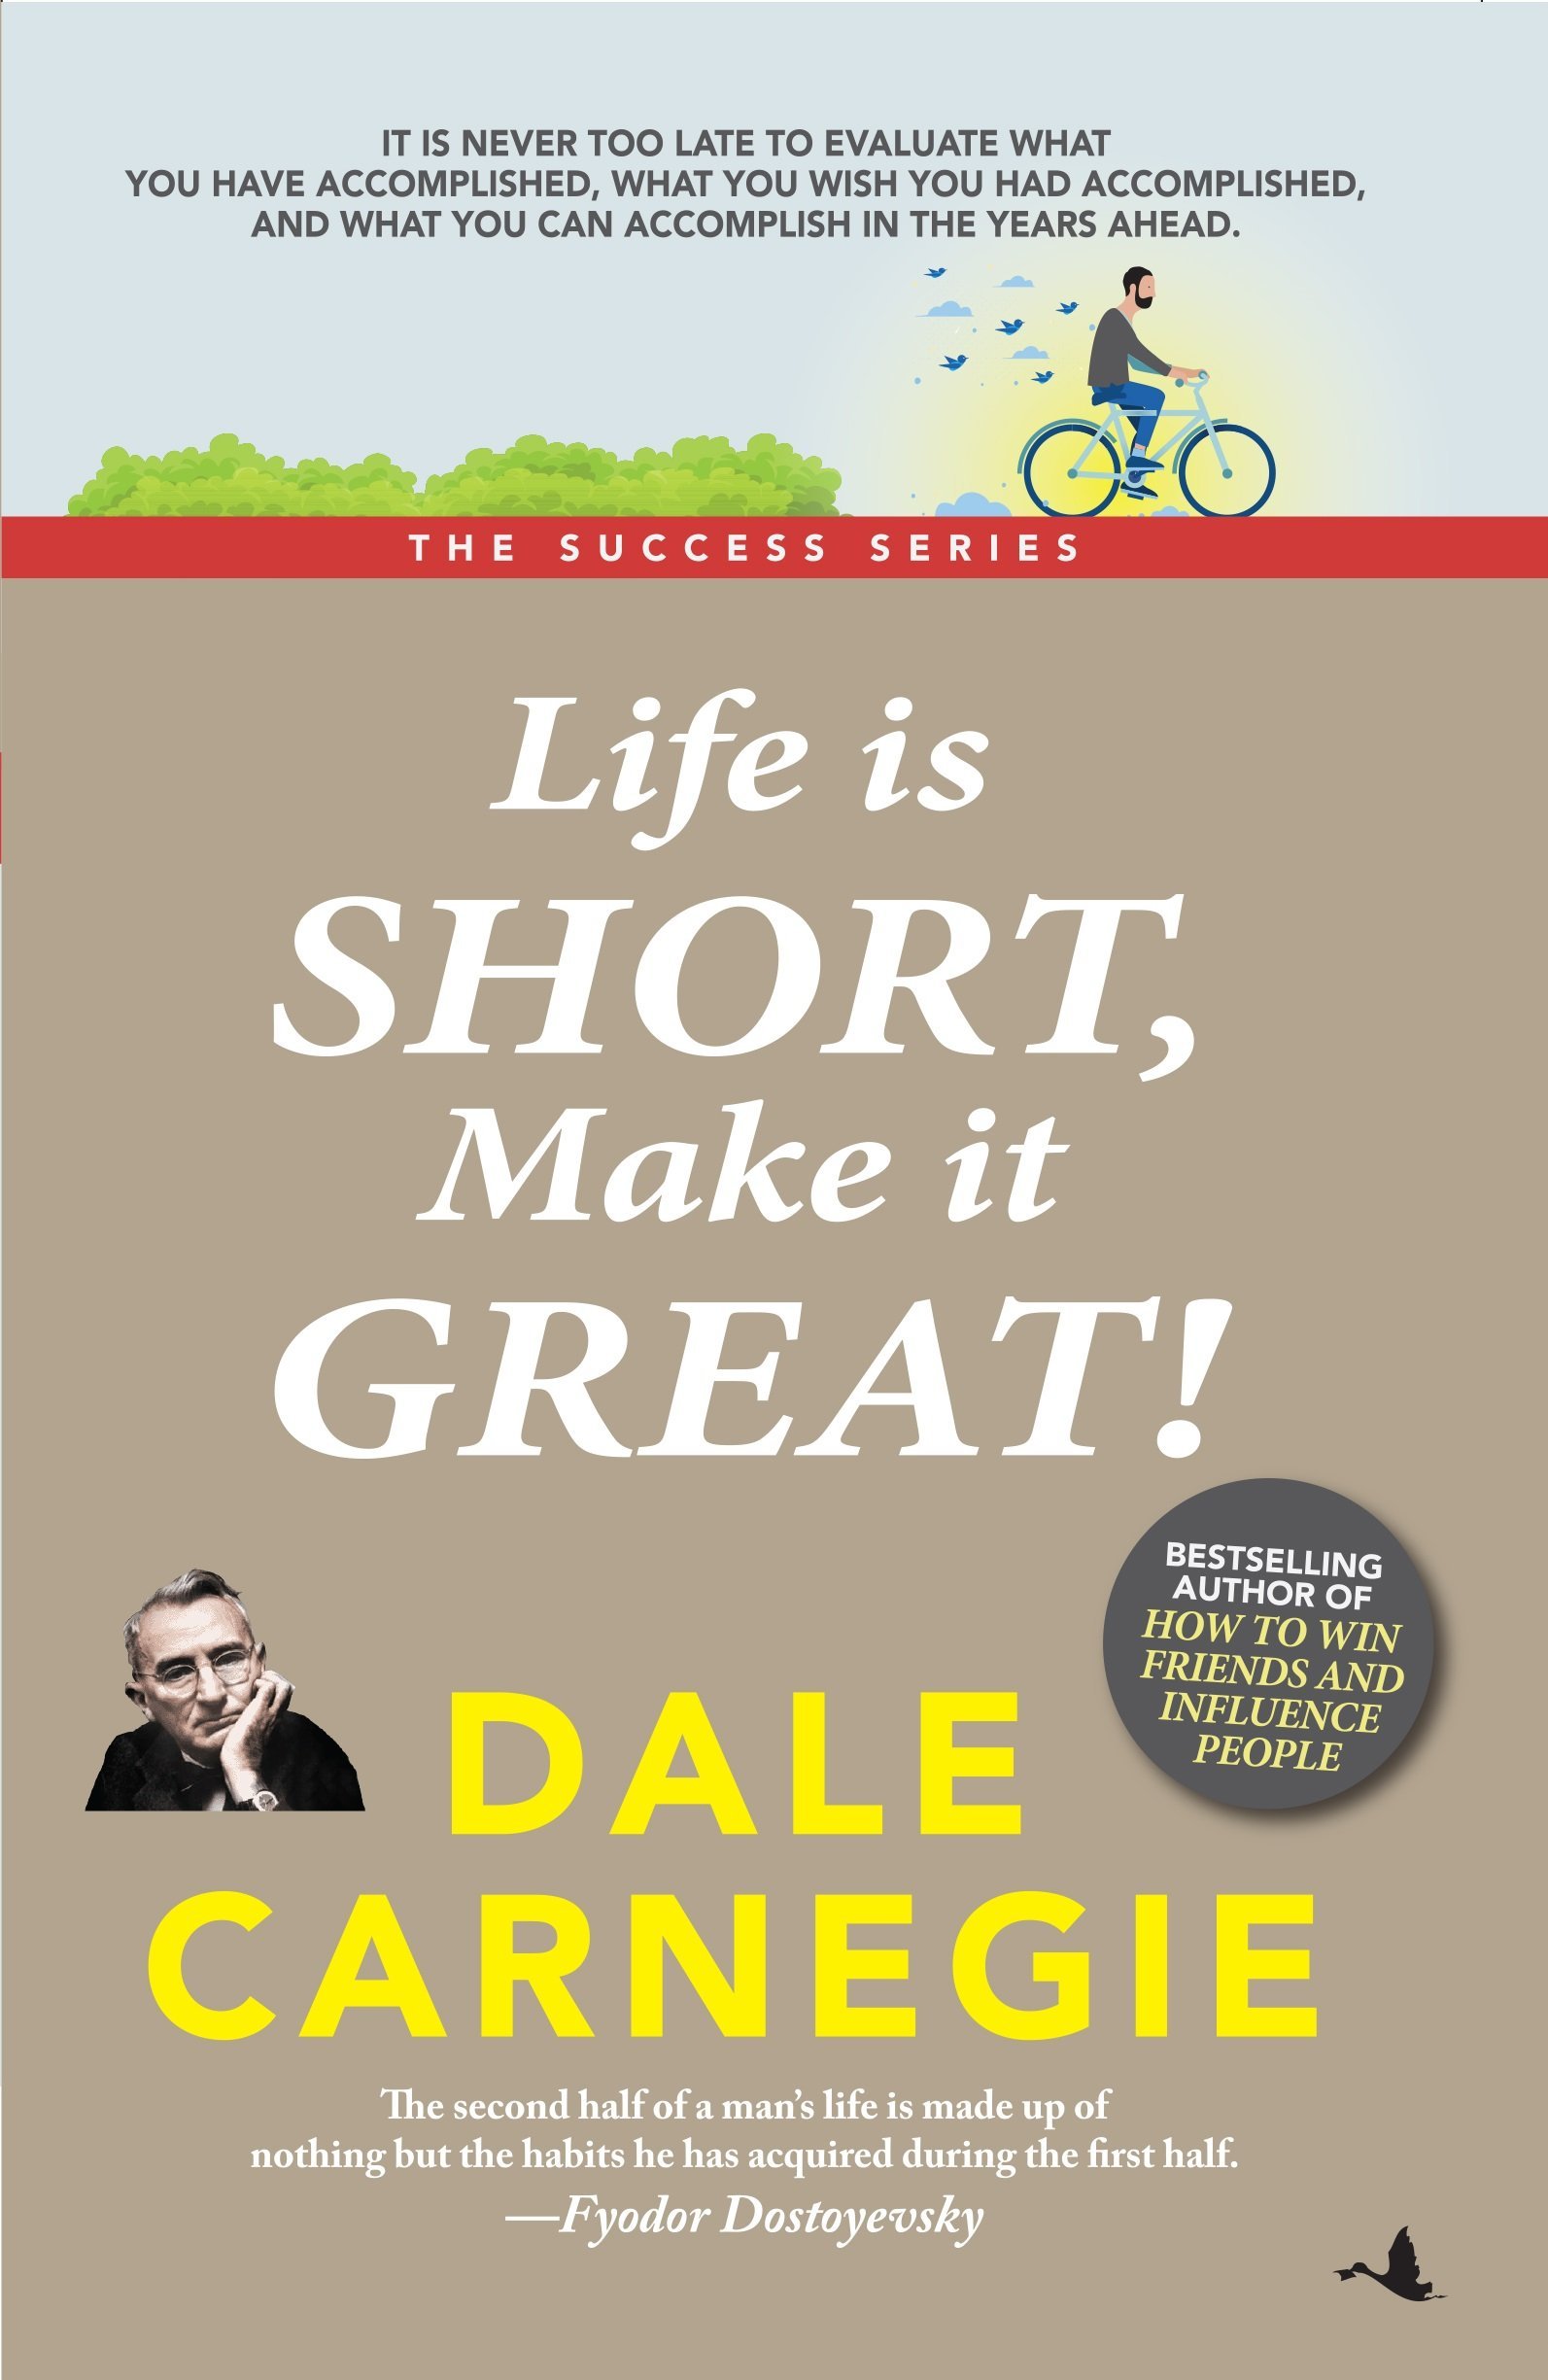 Life is Short, Make it Great!: Dale Carnegie Success Series